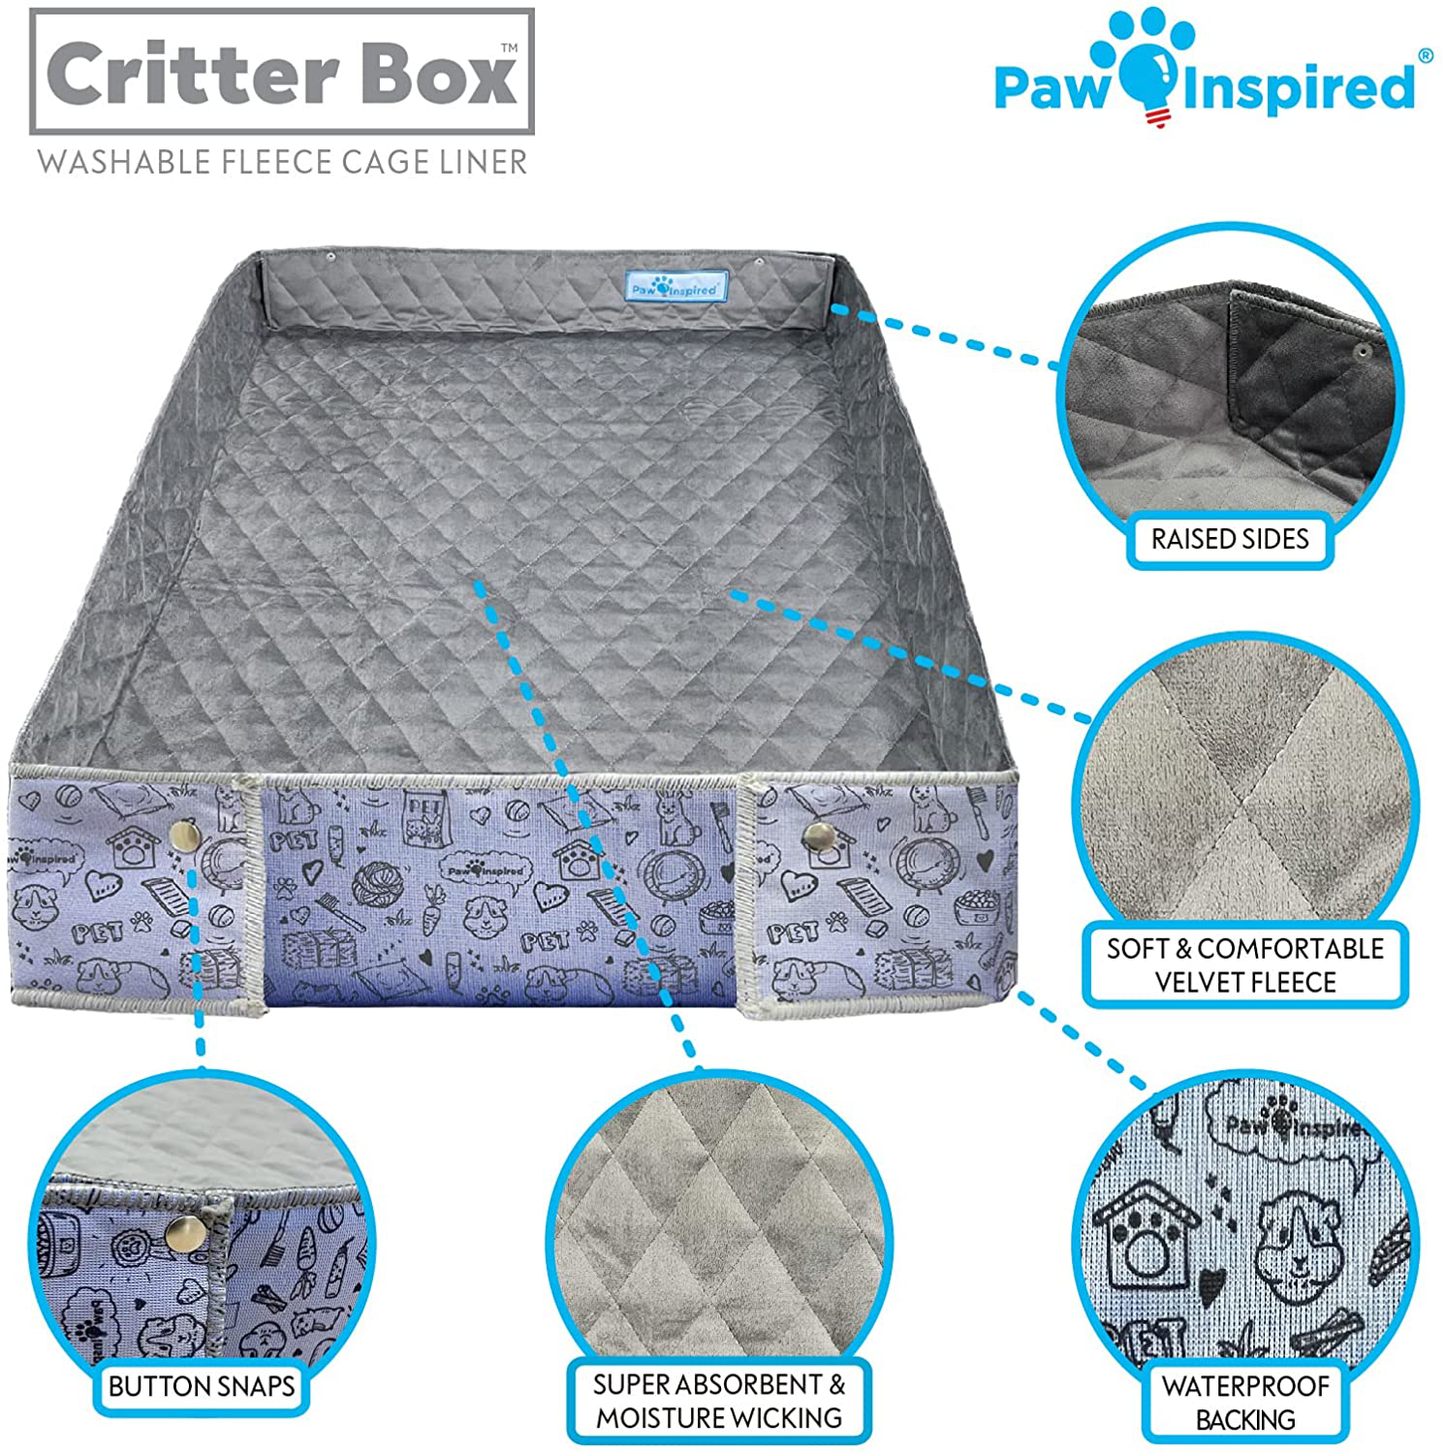 Paw Inspired Critter Box | Washable Guinea Pig Cage Liners with Raised Sides | Super Absorbent Fleece Bedding for Guinea Pigs Rabbits, Hamsters, & All Small Animals | Edge Protected Pee Pads